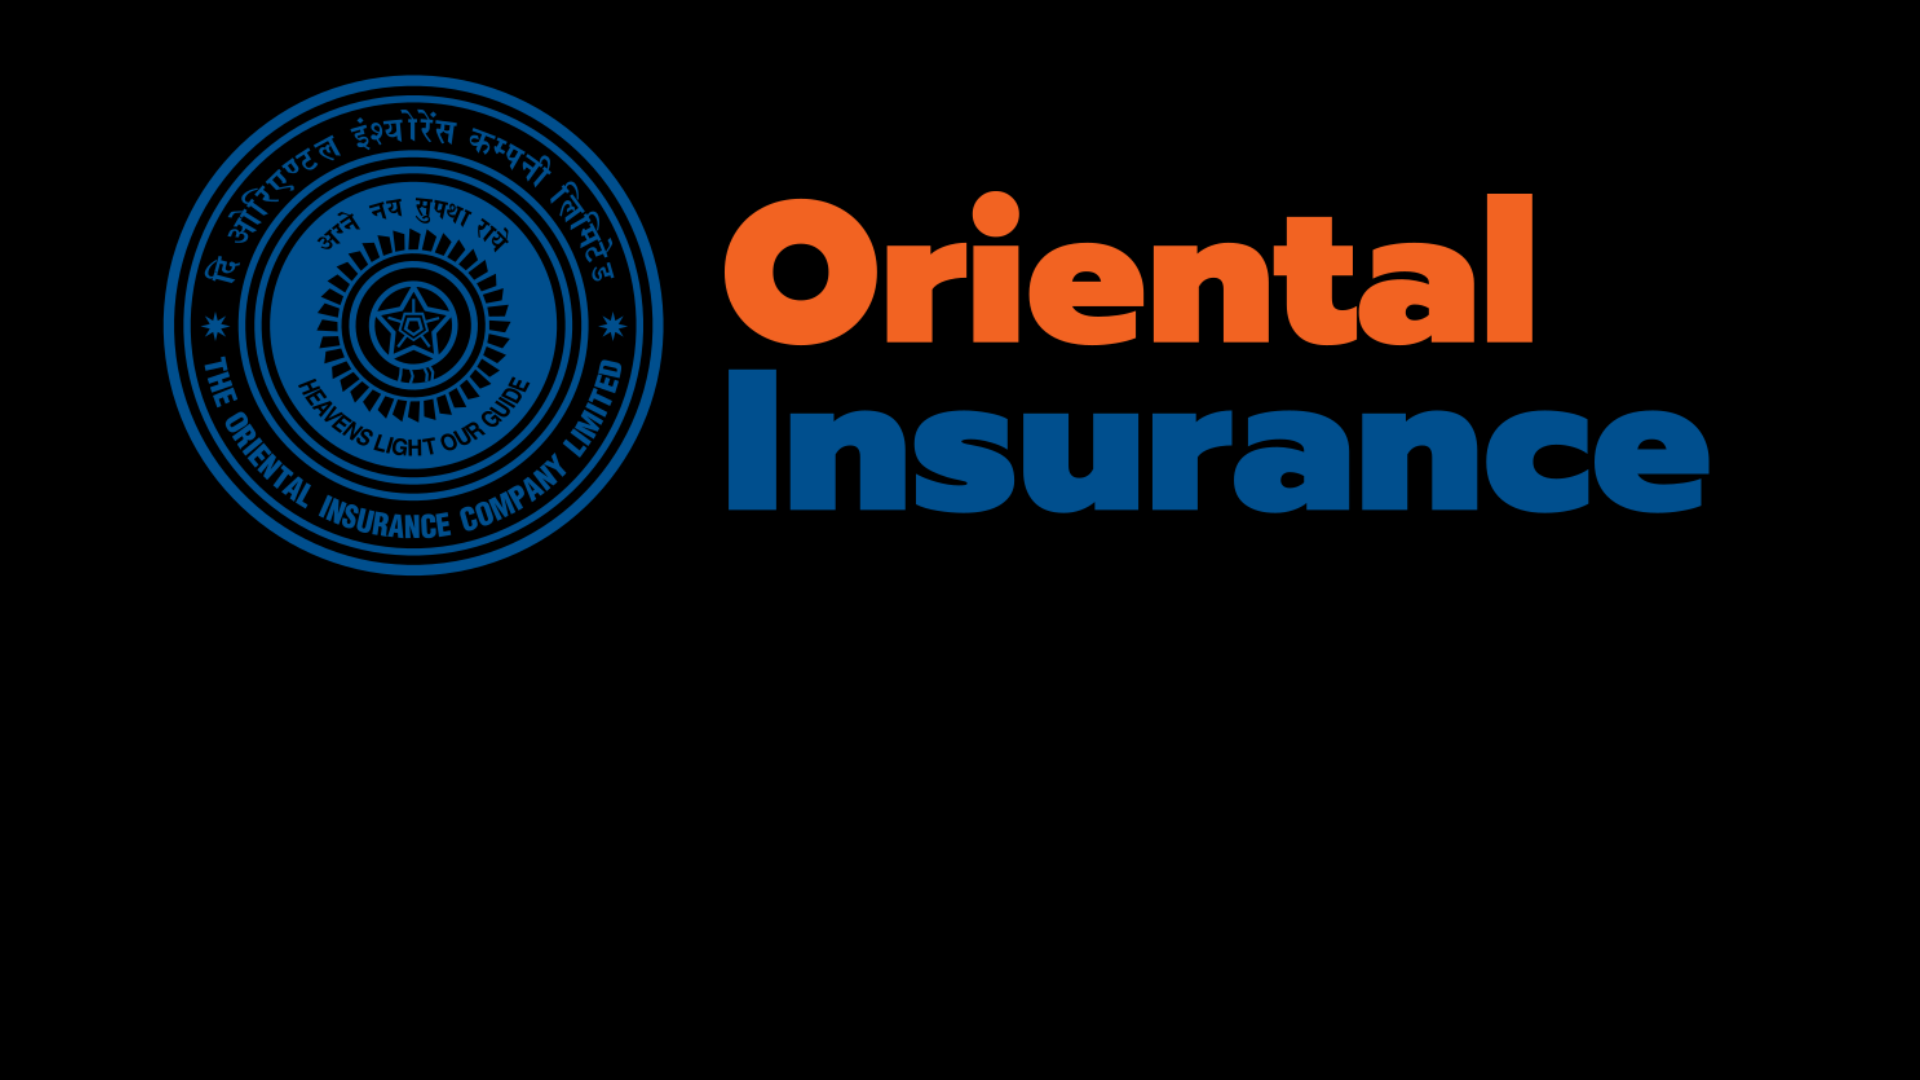 Oriental Insurance Company Limited: